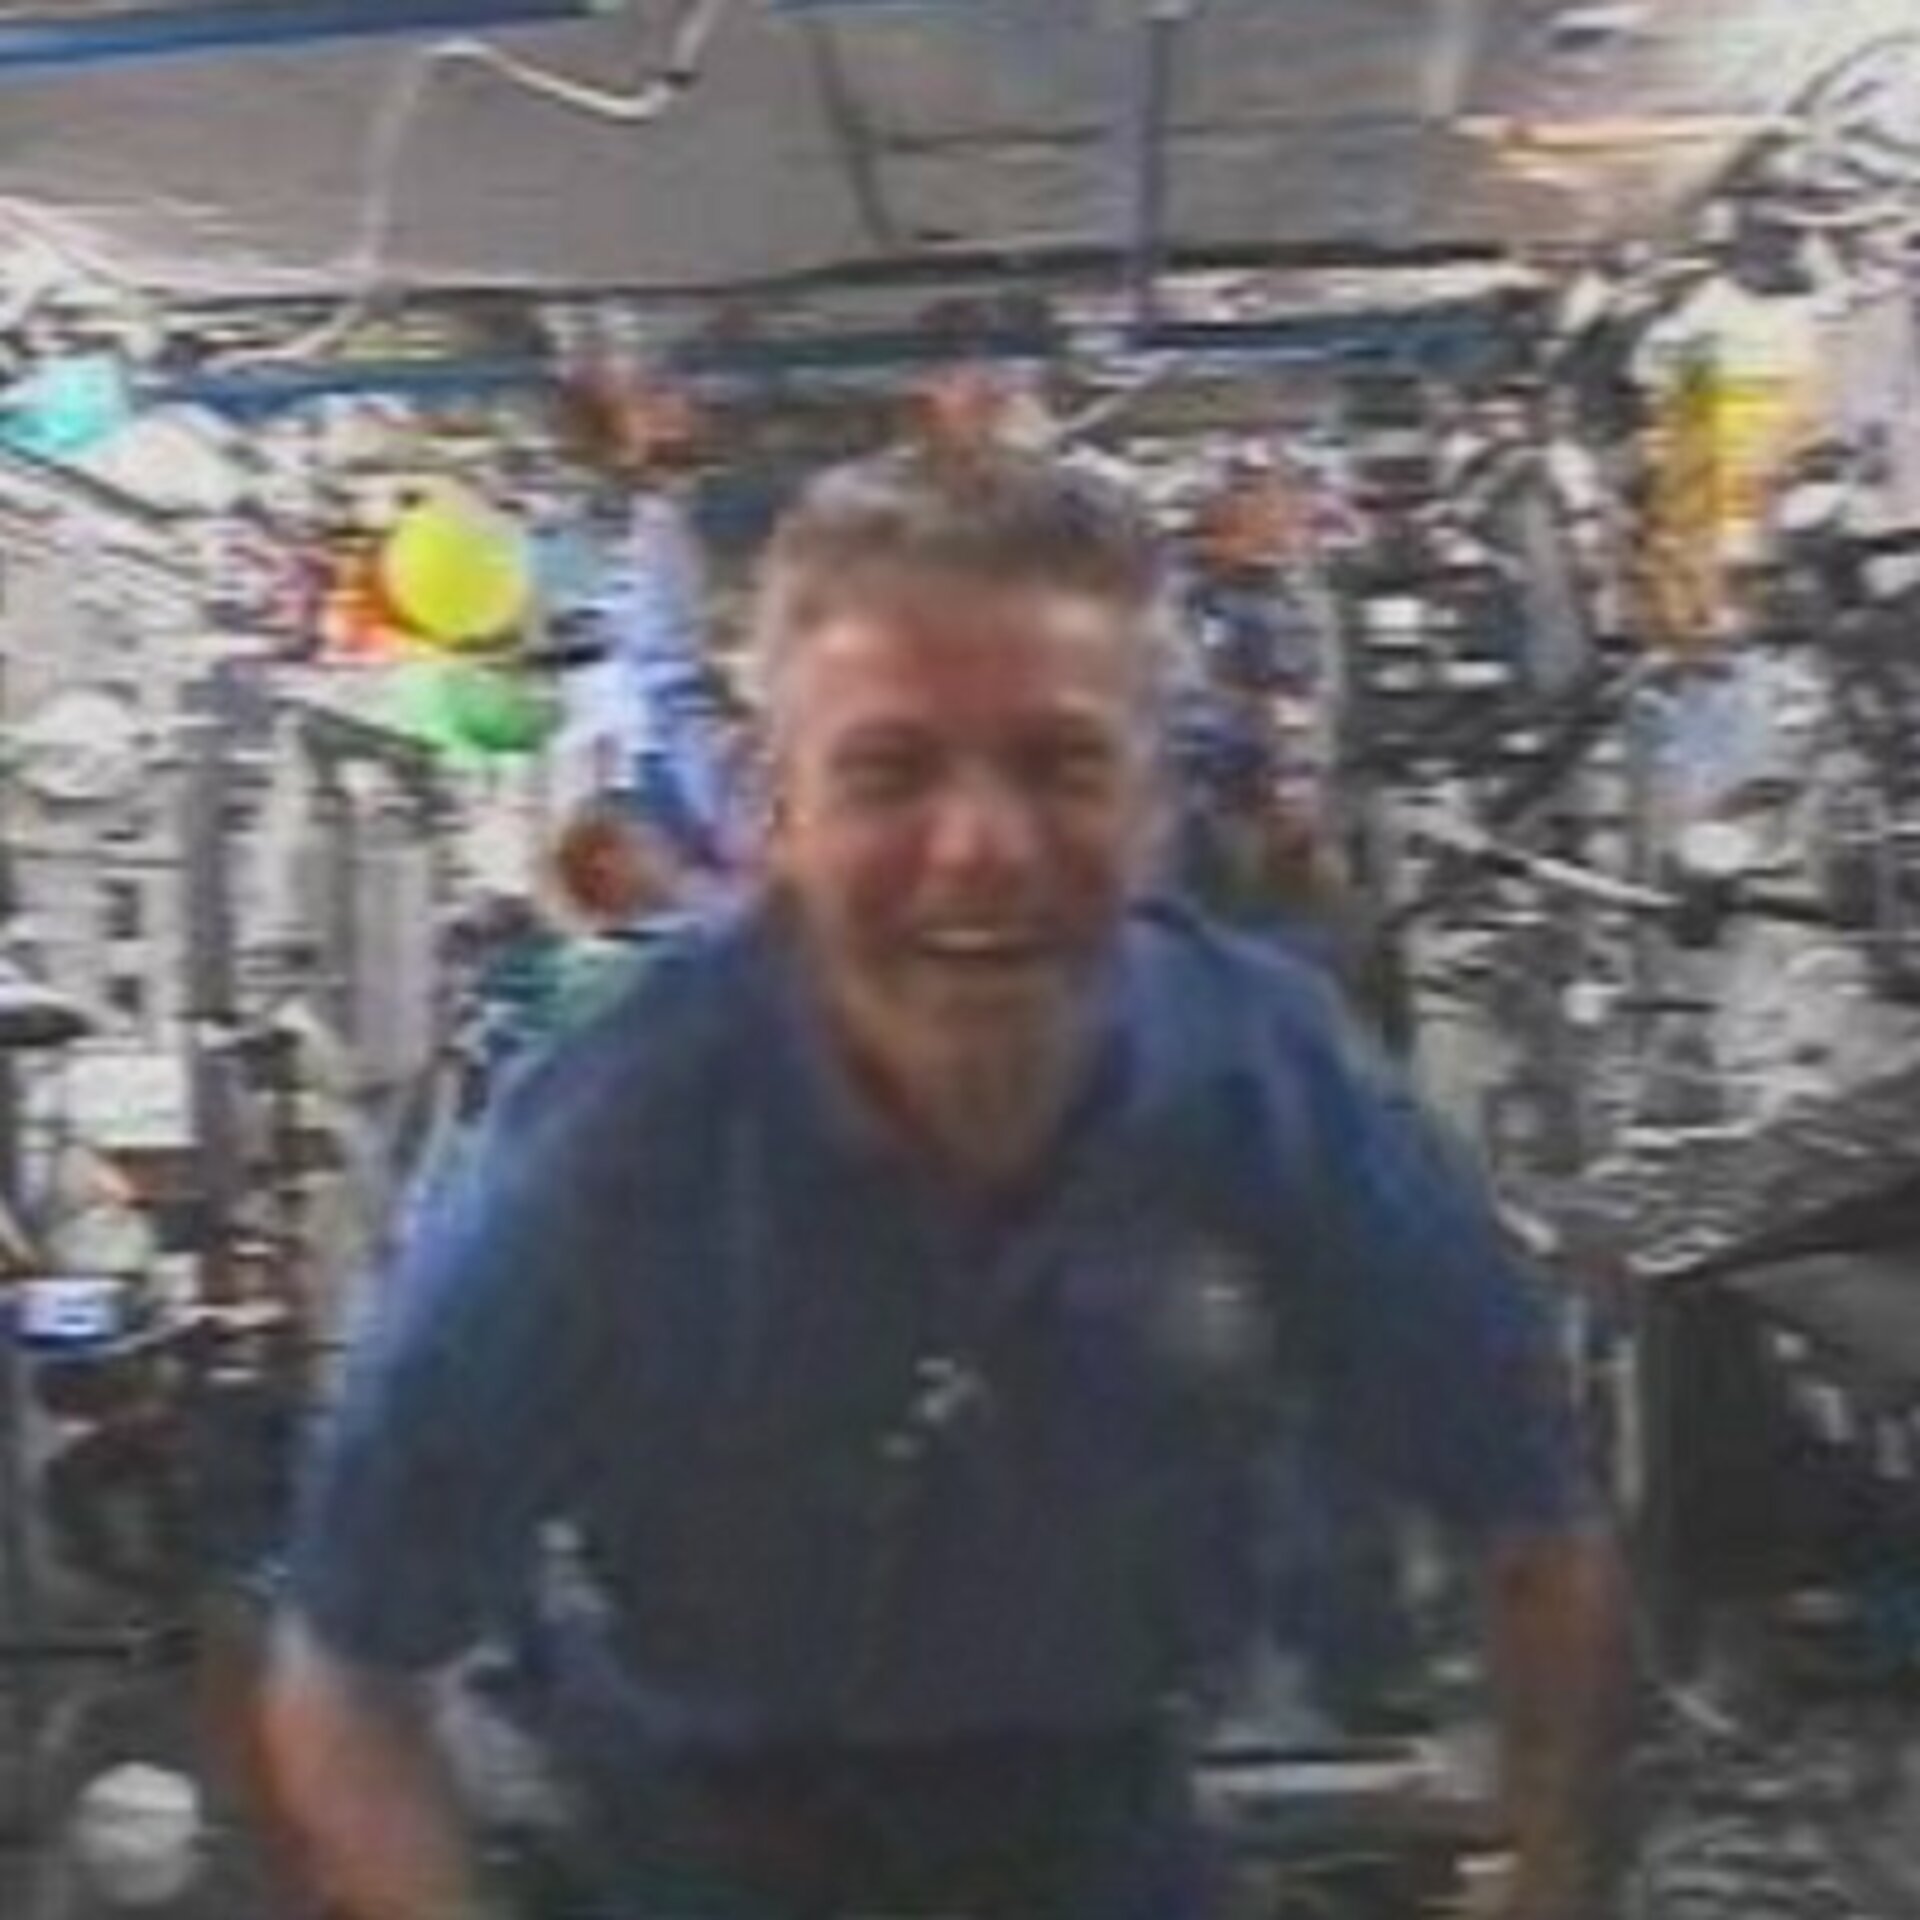 Thomas Reiter shortly after entering ISS for the first time